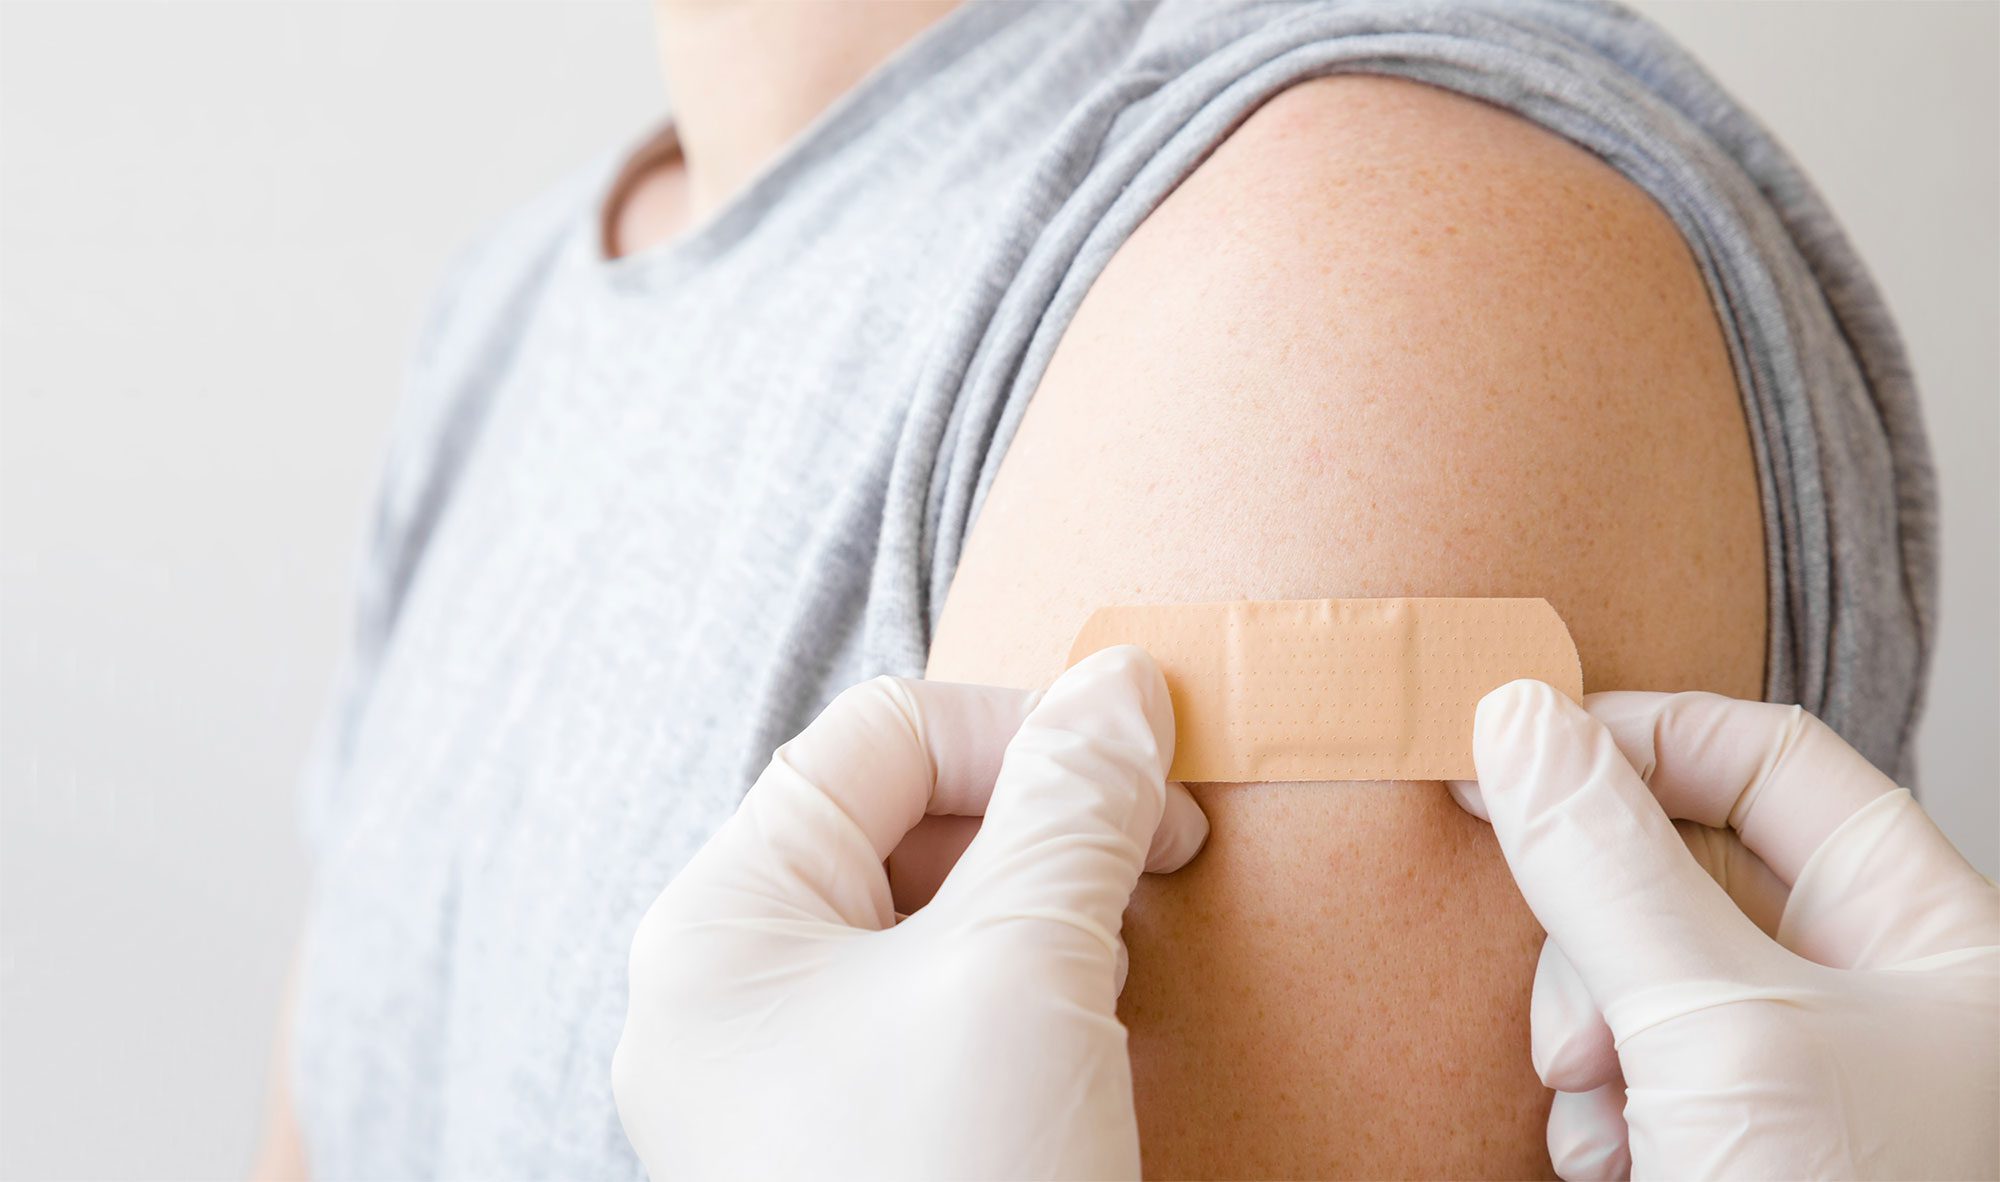 Vaccinations and Tips for Protecting Yourself and Others When Returning to Work